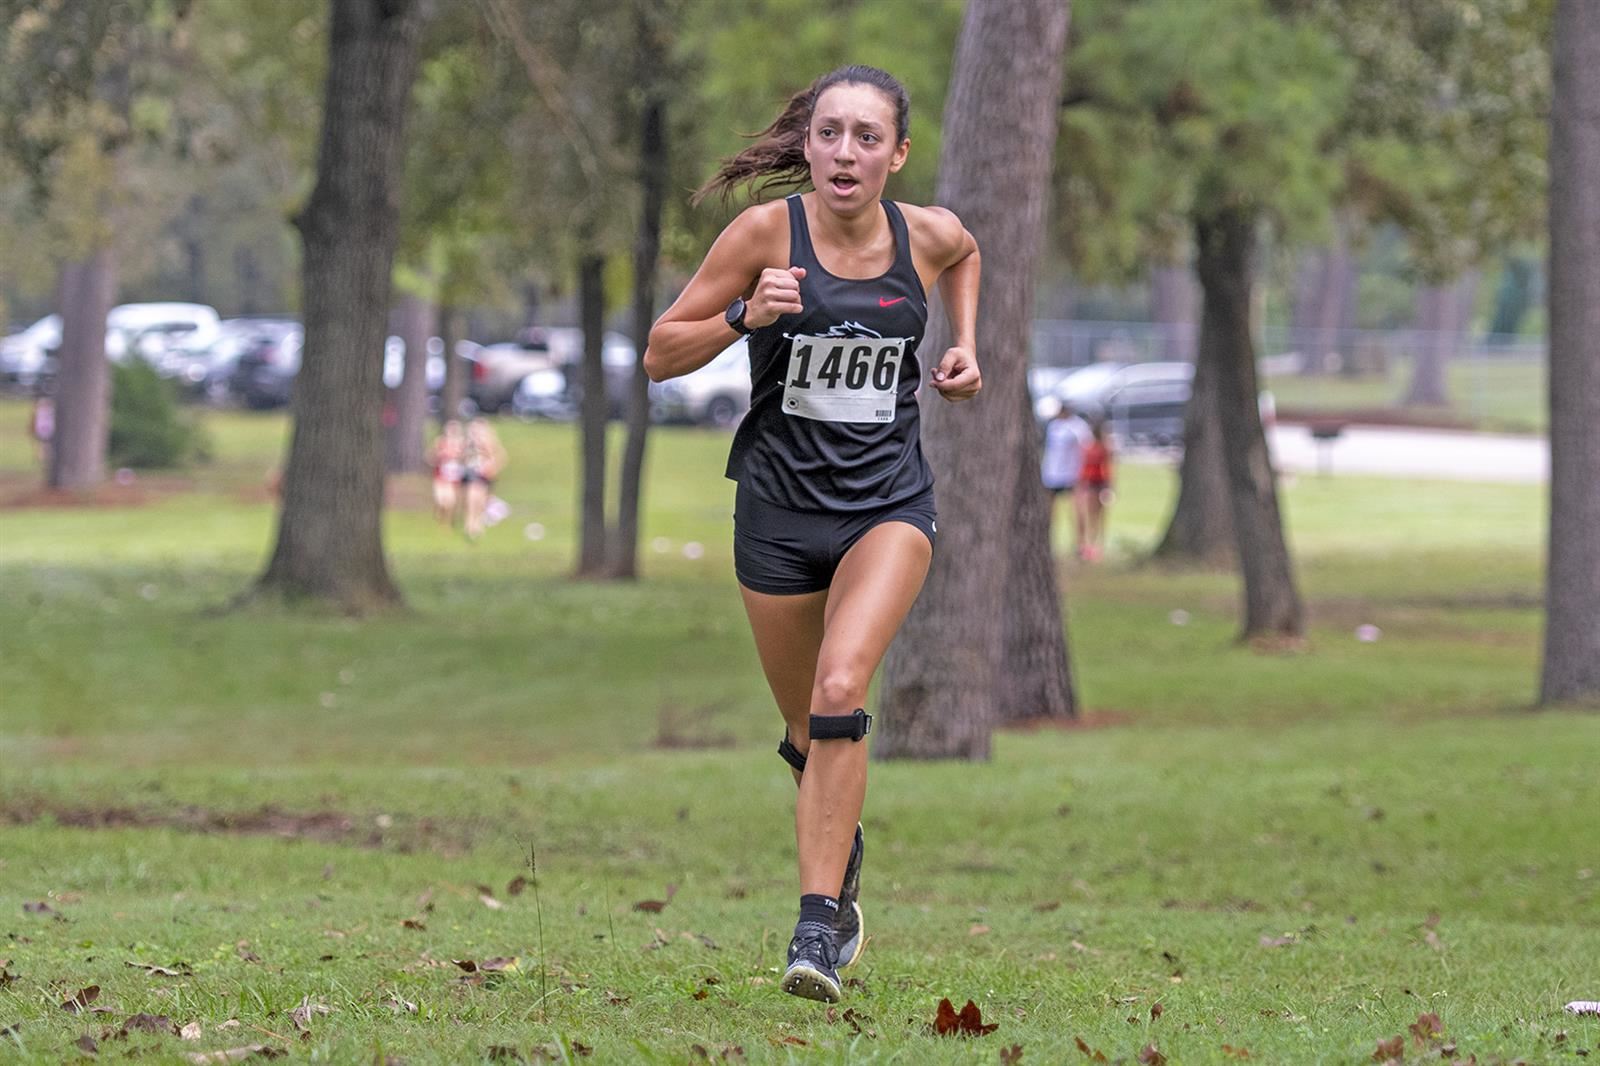 Langham Creek sophomore Sofia Barreda earned first-team honors on the All-District 16-6A cross country girls’ team.